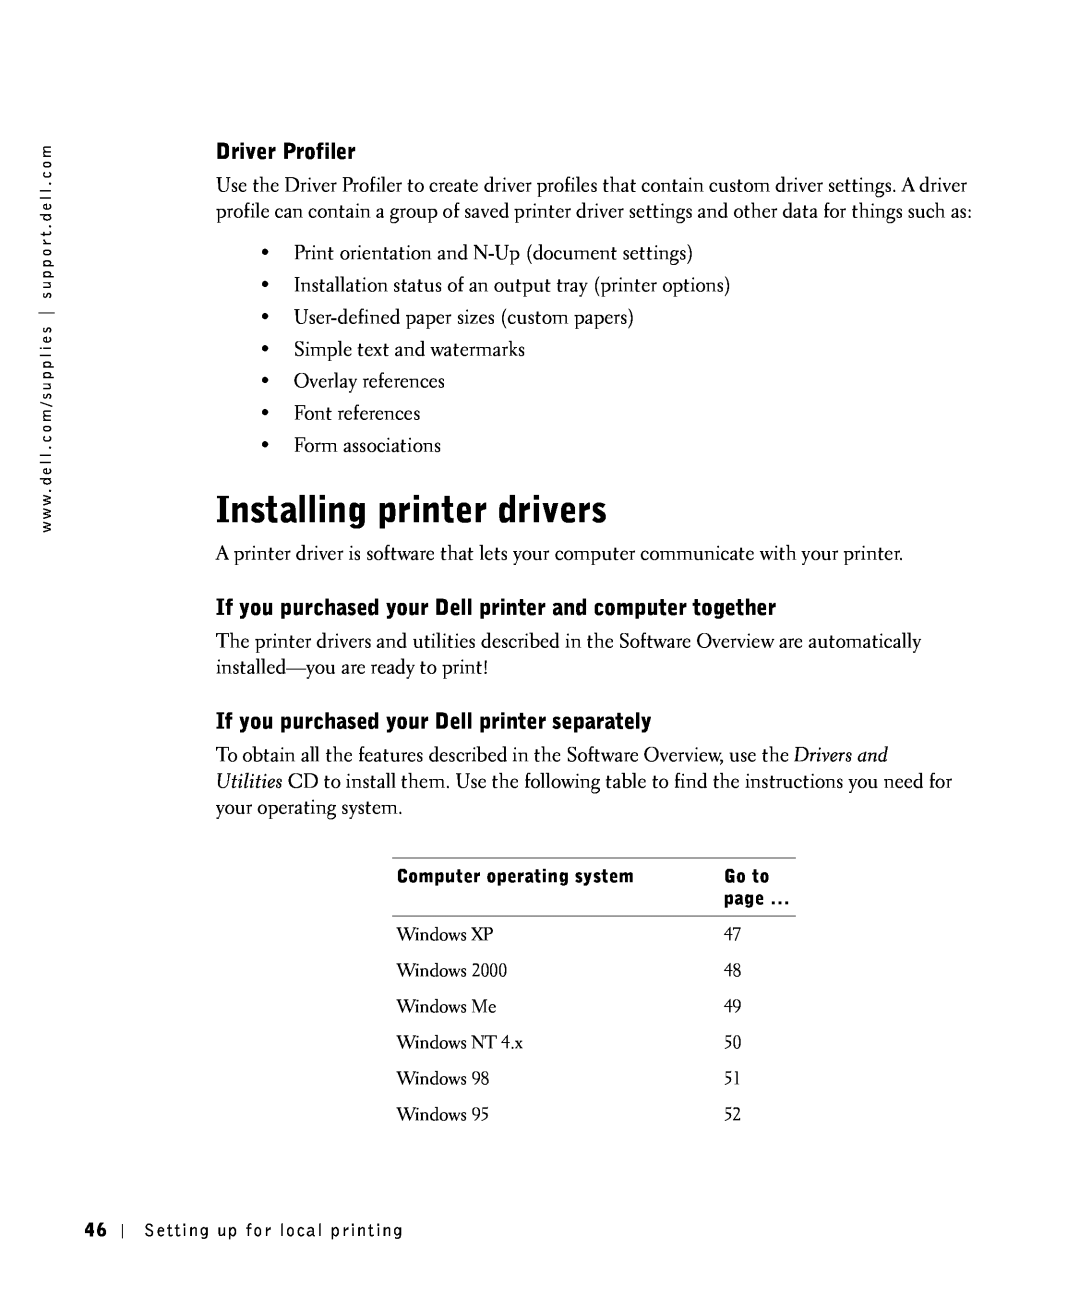 Dell S2500 Installing printer drivers, Driver Profiler, If you purchased your Dell printer and computer together 